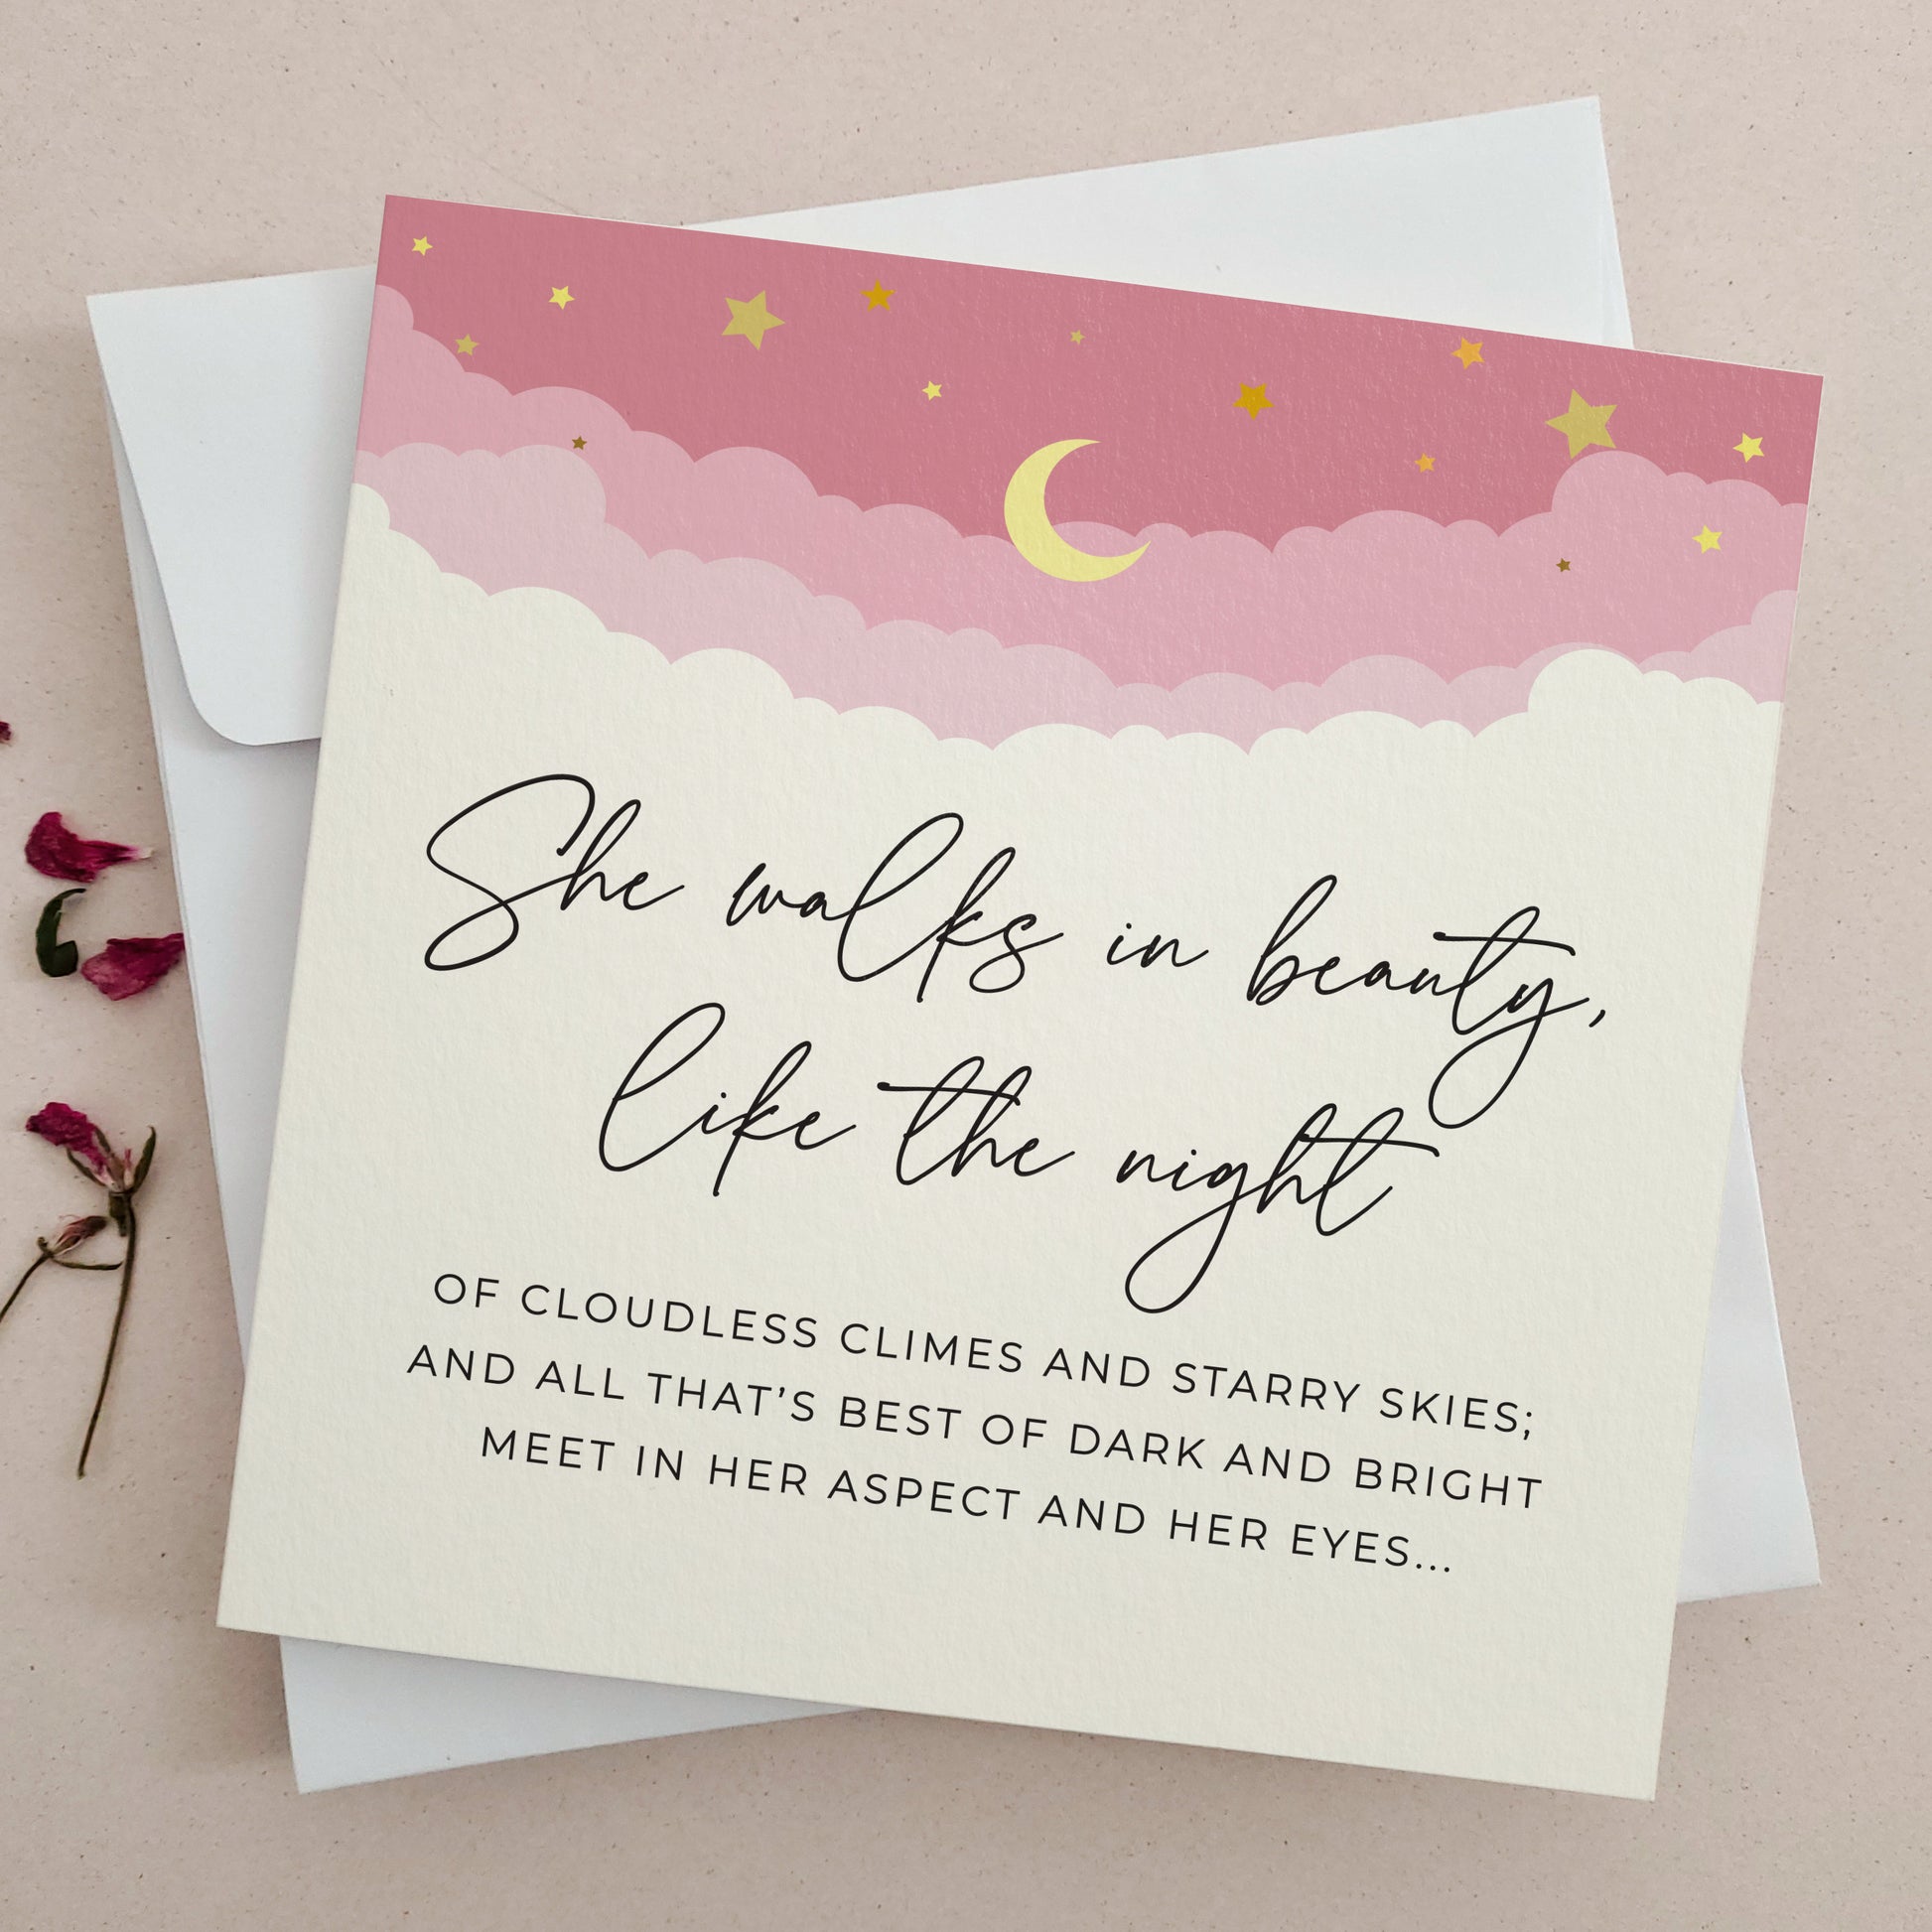 personalized romantic valelntines day card - XOXOKristen